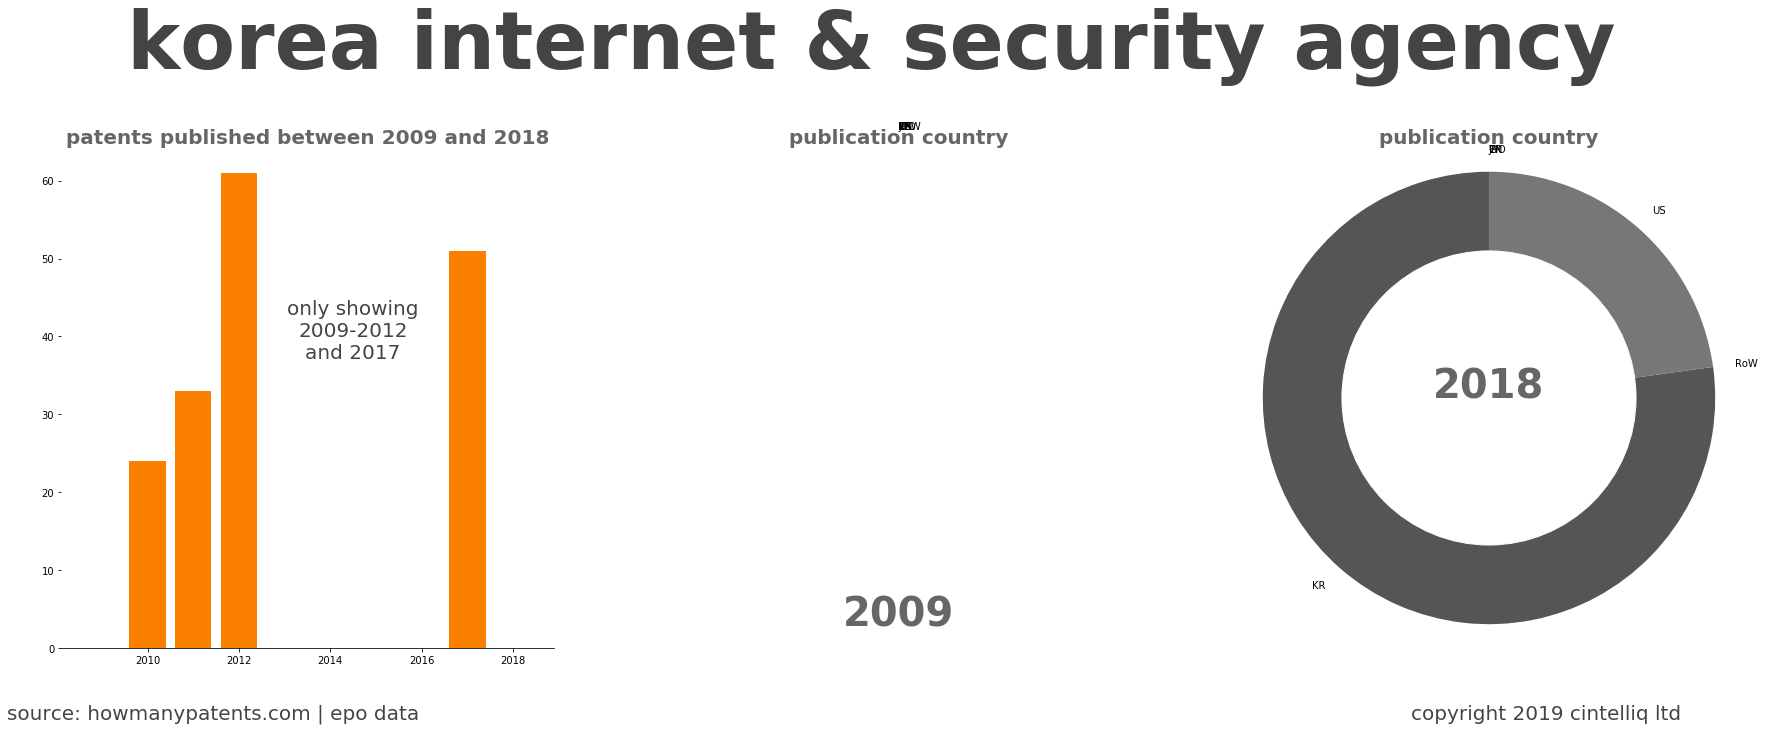 summary of patents for Korea Internet & Security Agency